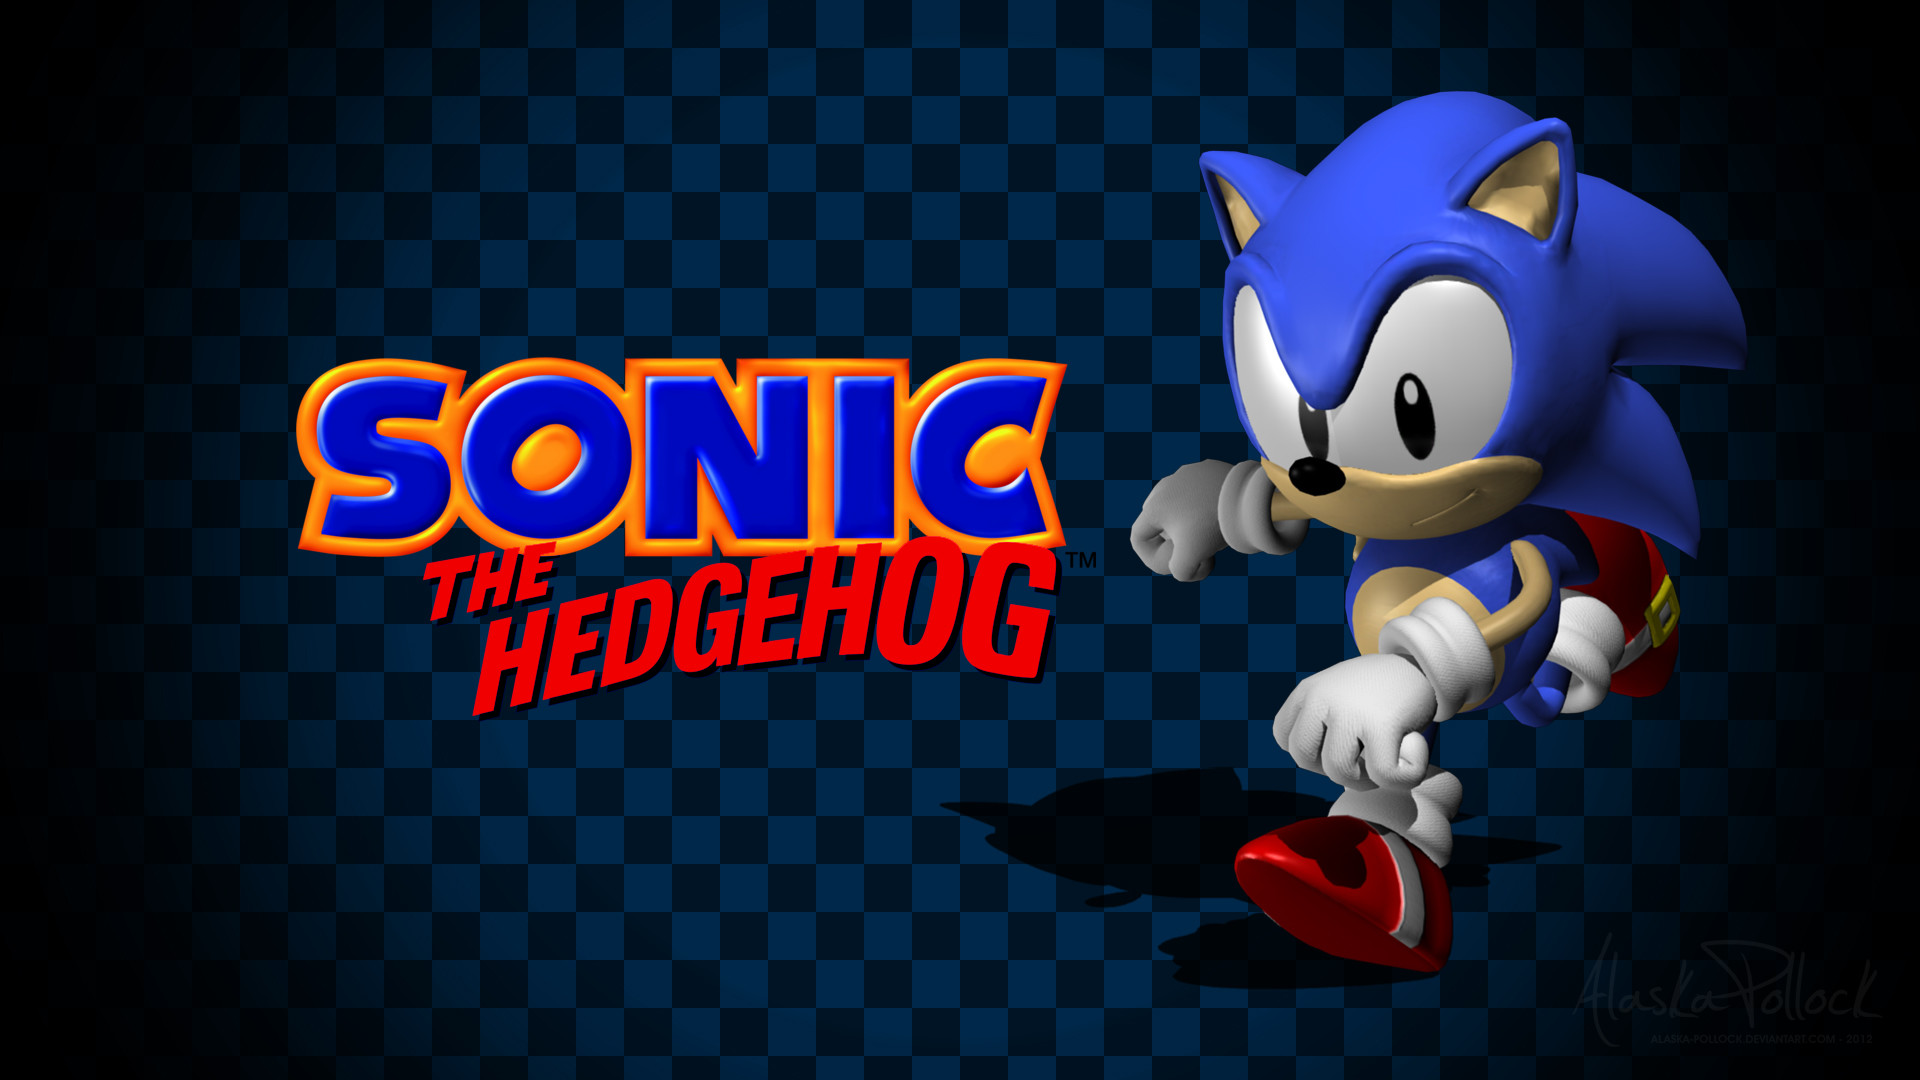 1920x1080 Sonic backgrounds images photos pictures.